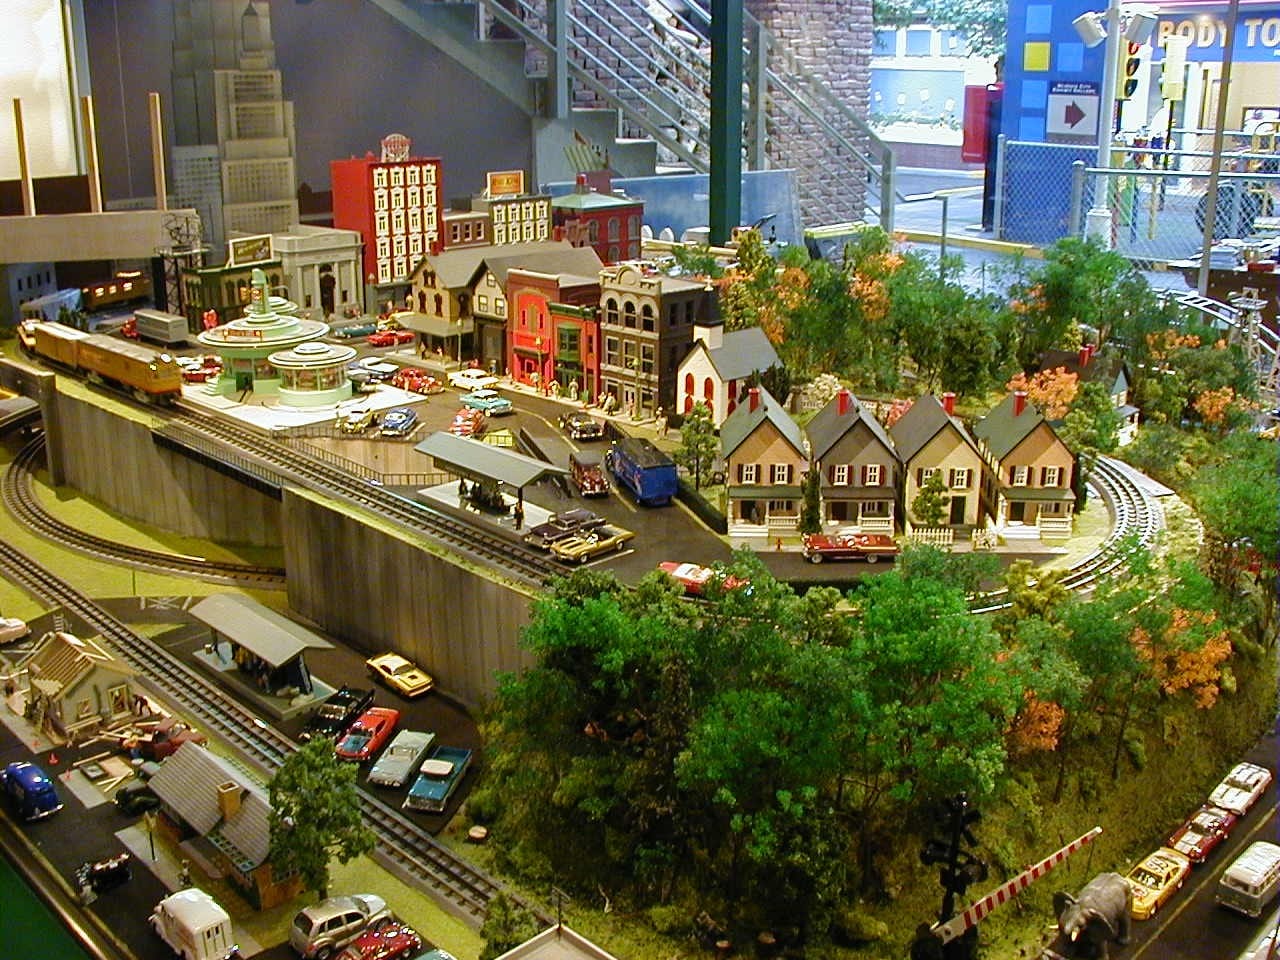 Download Donald's Wonderful 12' x 13' O Scale Model Train Photo Gallery